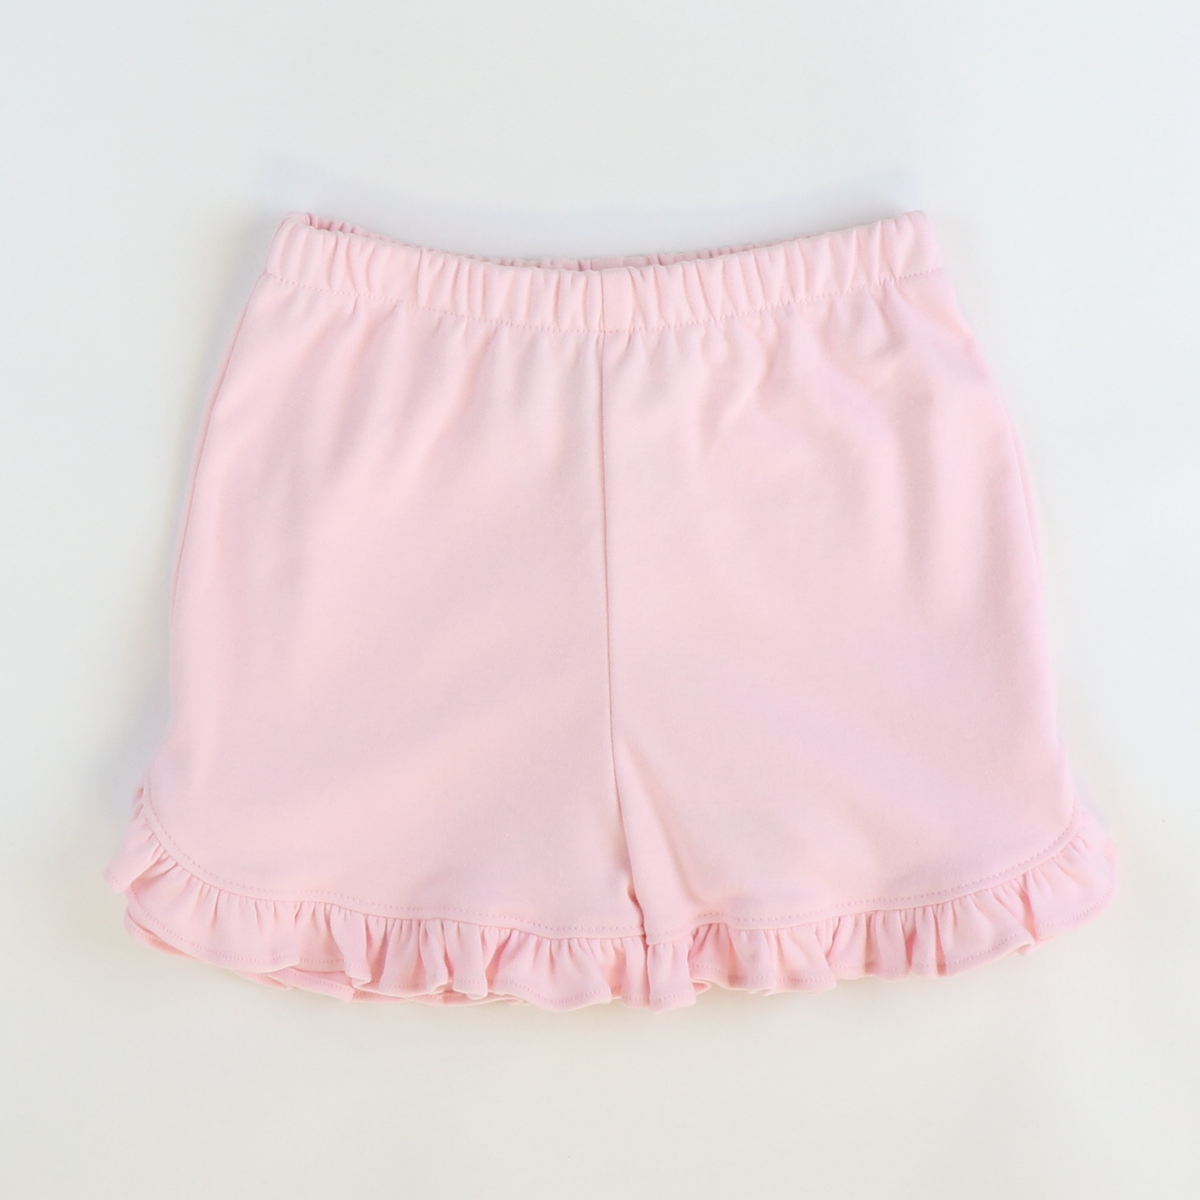 Out & About Ruffle Shorts - Pink Knit